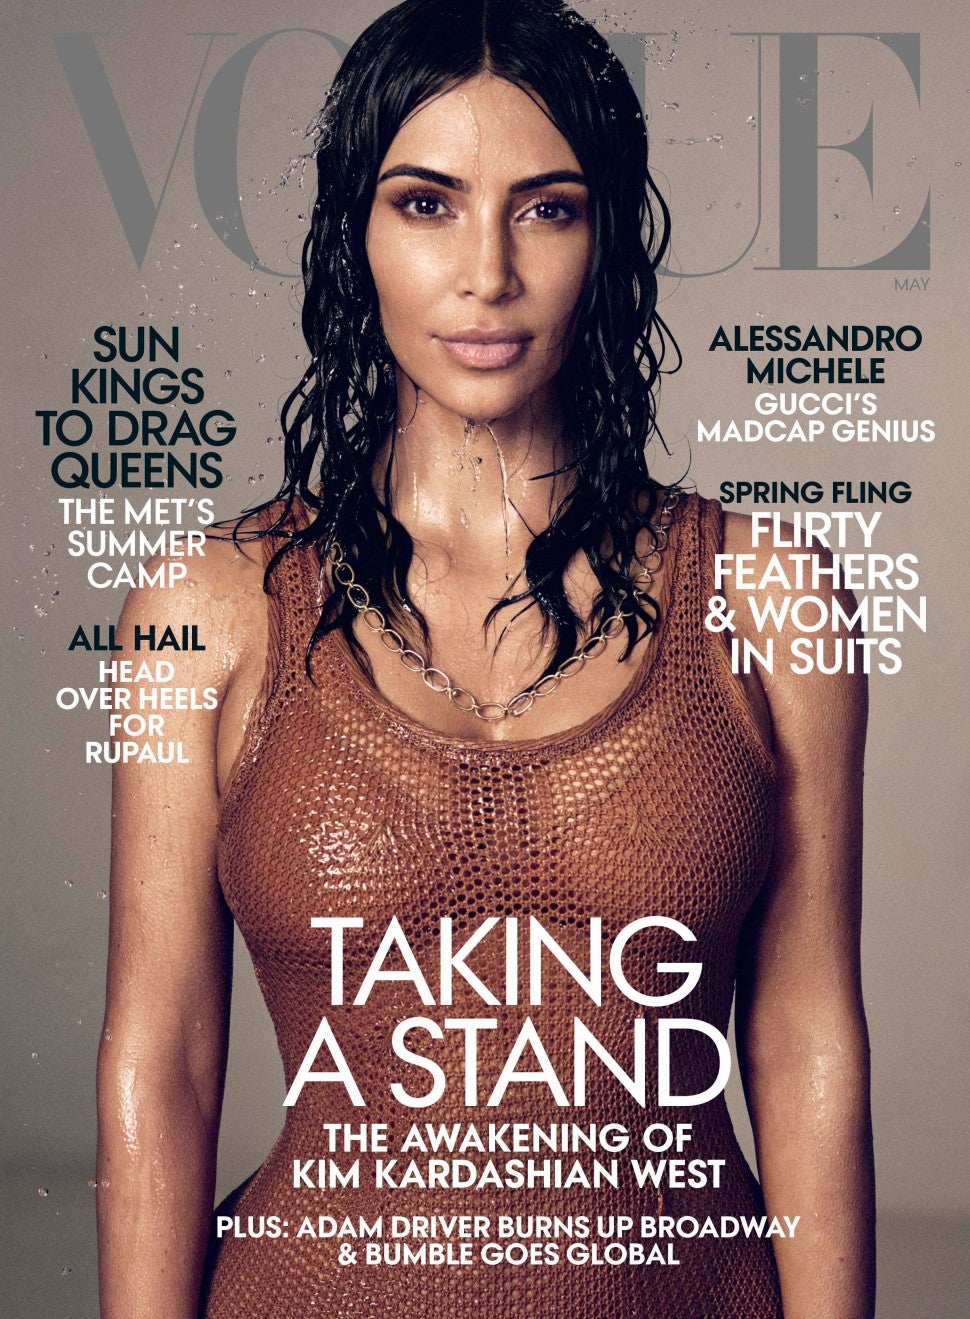 Kim Kardashian West covers Vogue's May 2019 issue